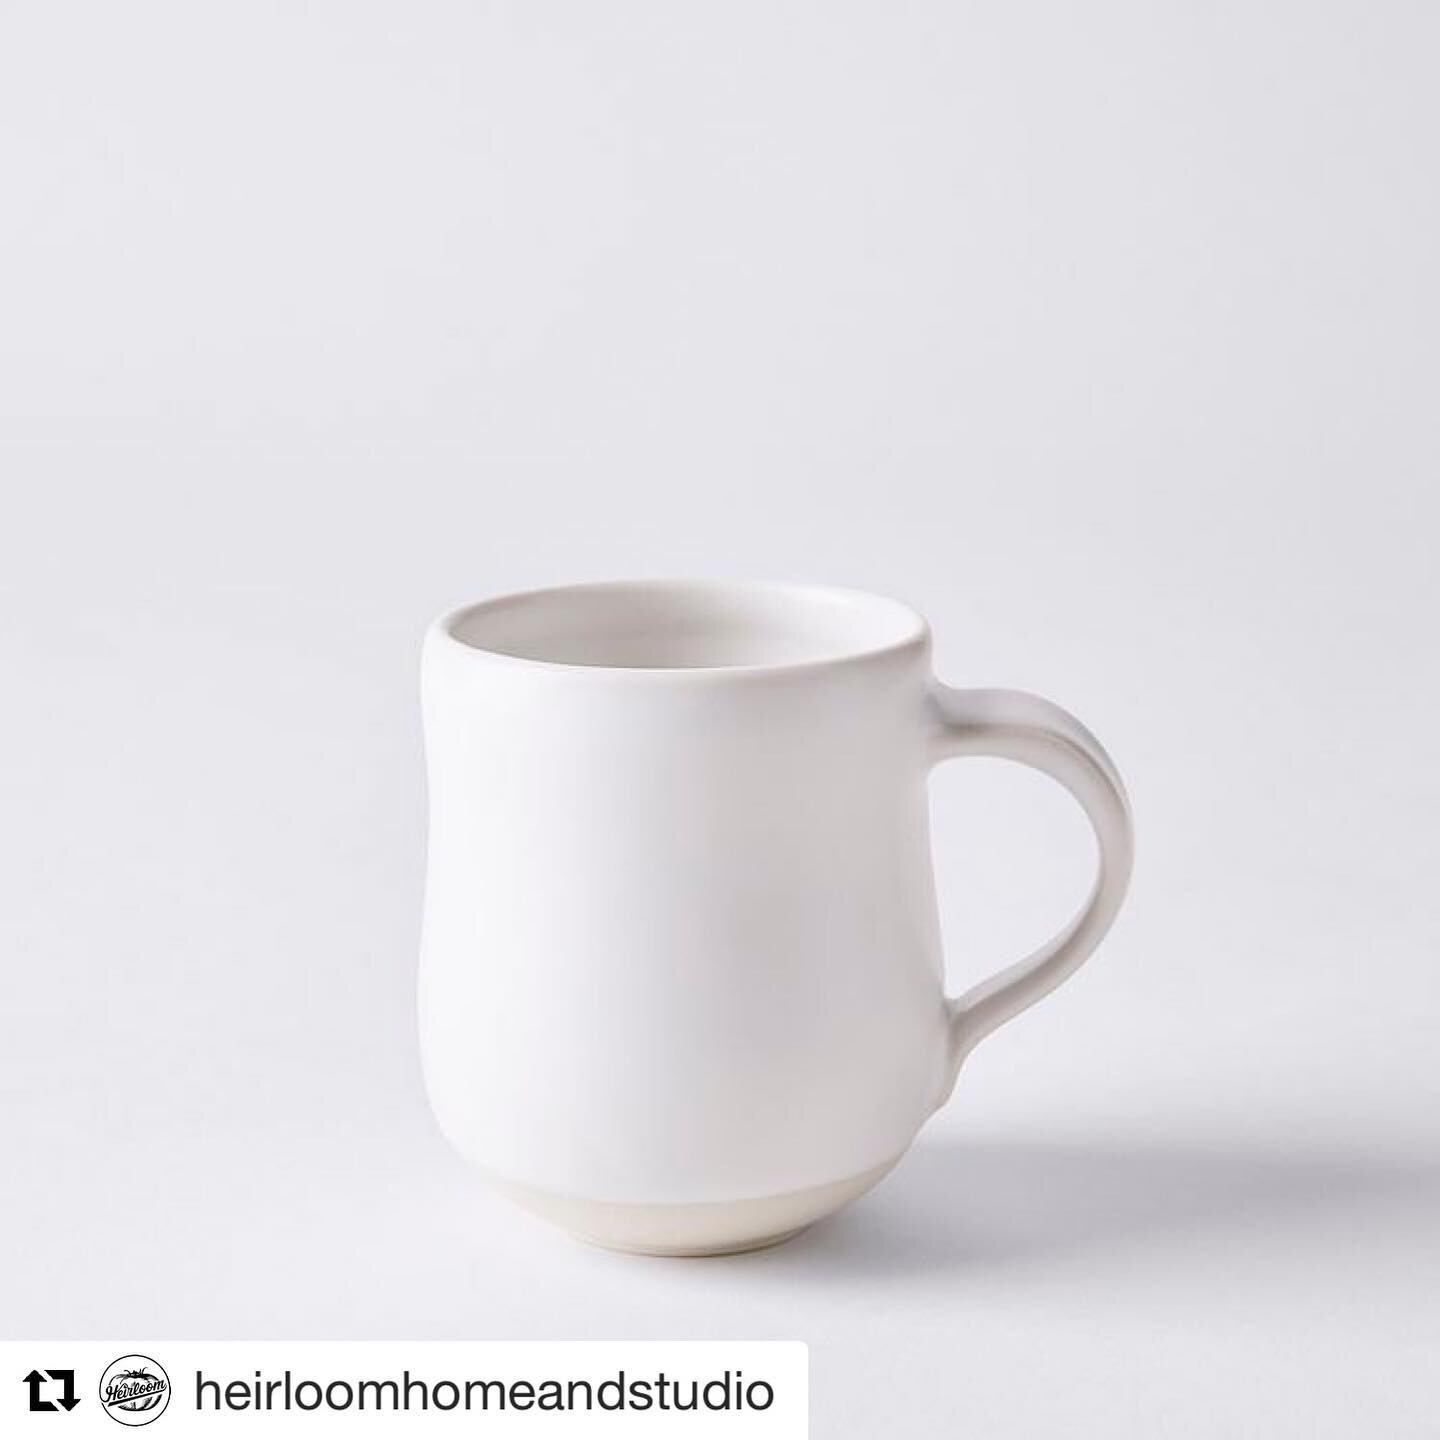 our new mug @heirloomhomeandstudio for @food52 
・・・
The Mug Project launched today! We always love working with @food52 &mdash; such an amazing team of people with a commitment to working responsibly with artists. Photography credit: @tymecham Link i